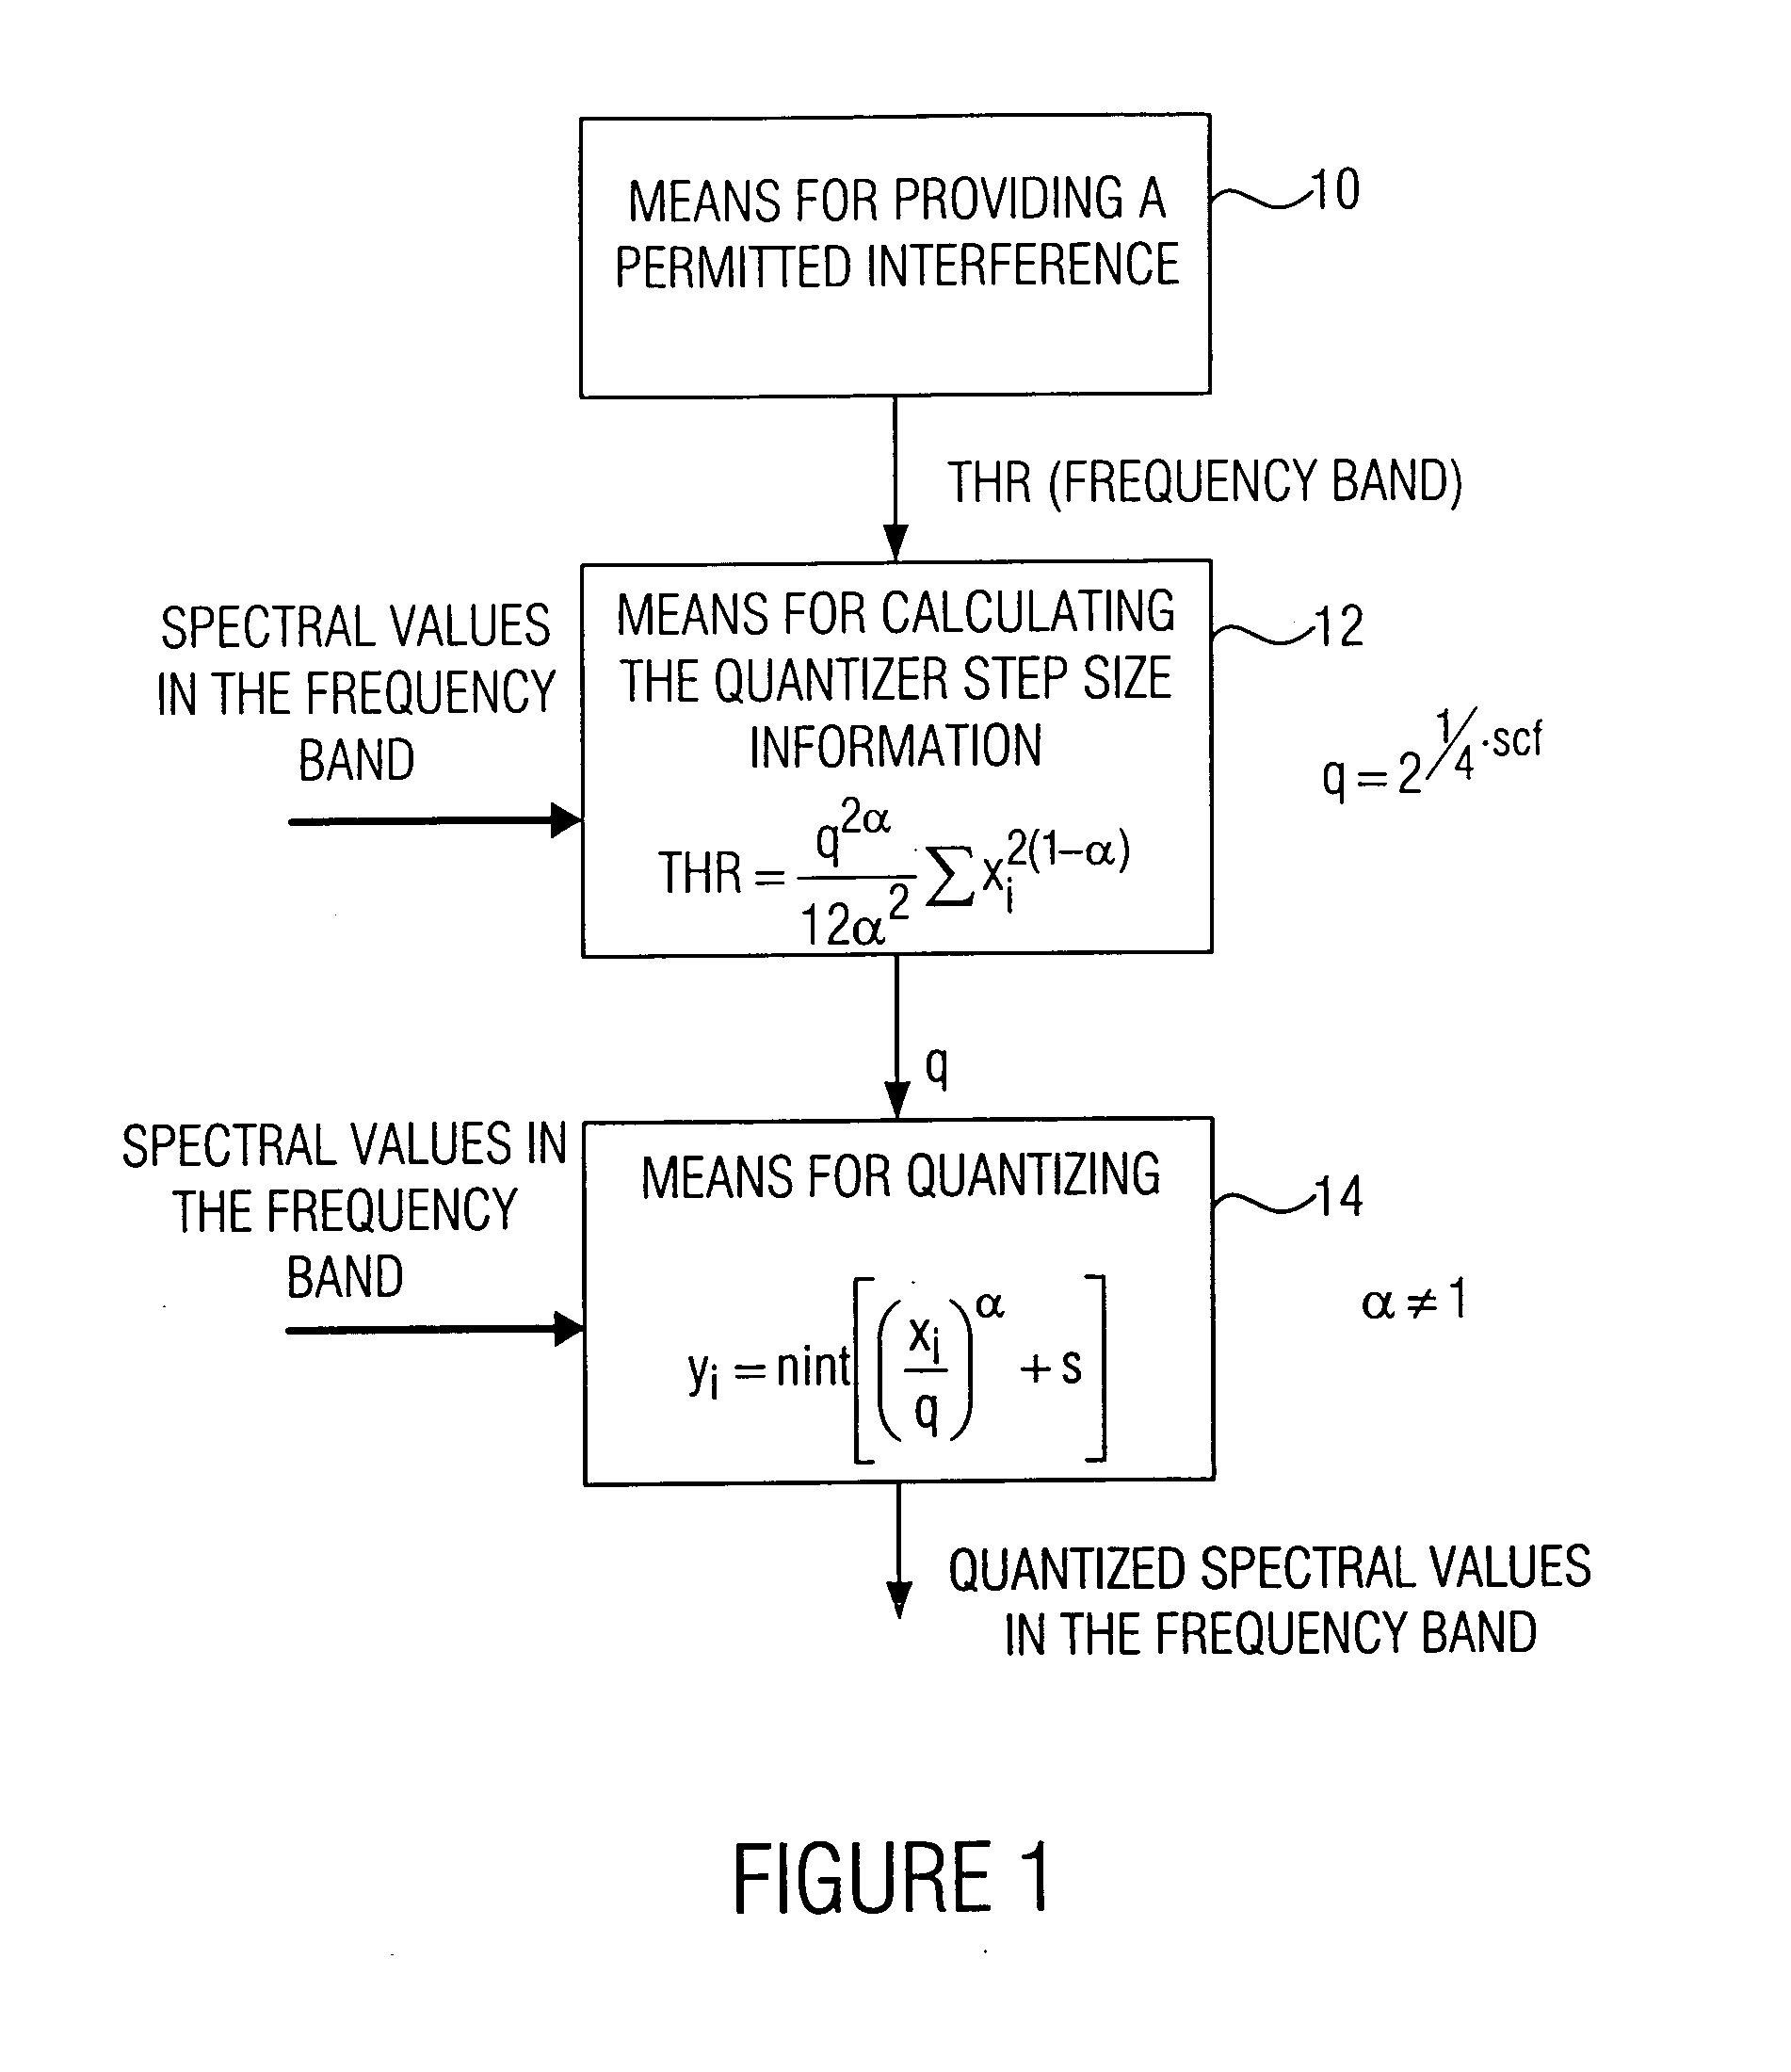 Apparatus and method for determining a quantizer step size